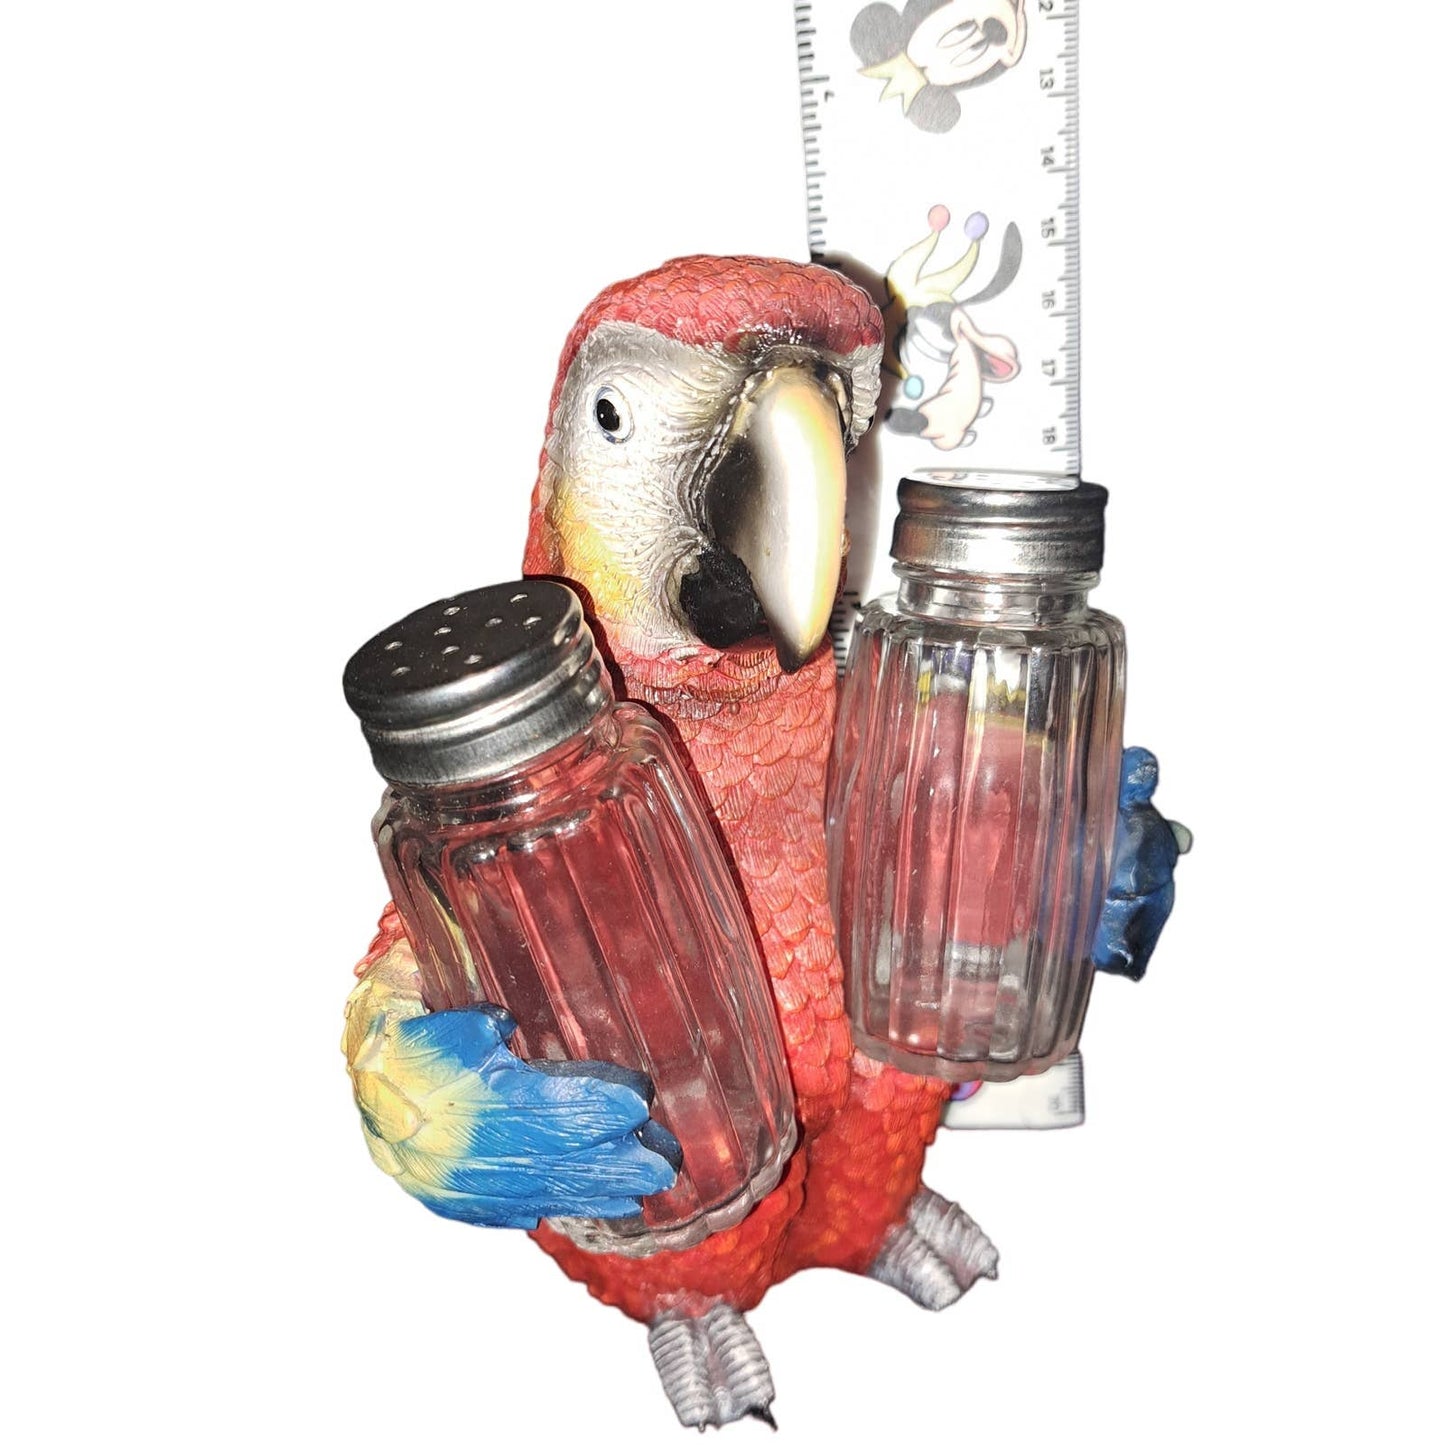 NIB- ADORABLE! Colorful Scarlet Macaw Parrot Salt and Pepper Shaker